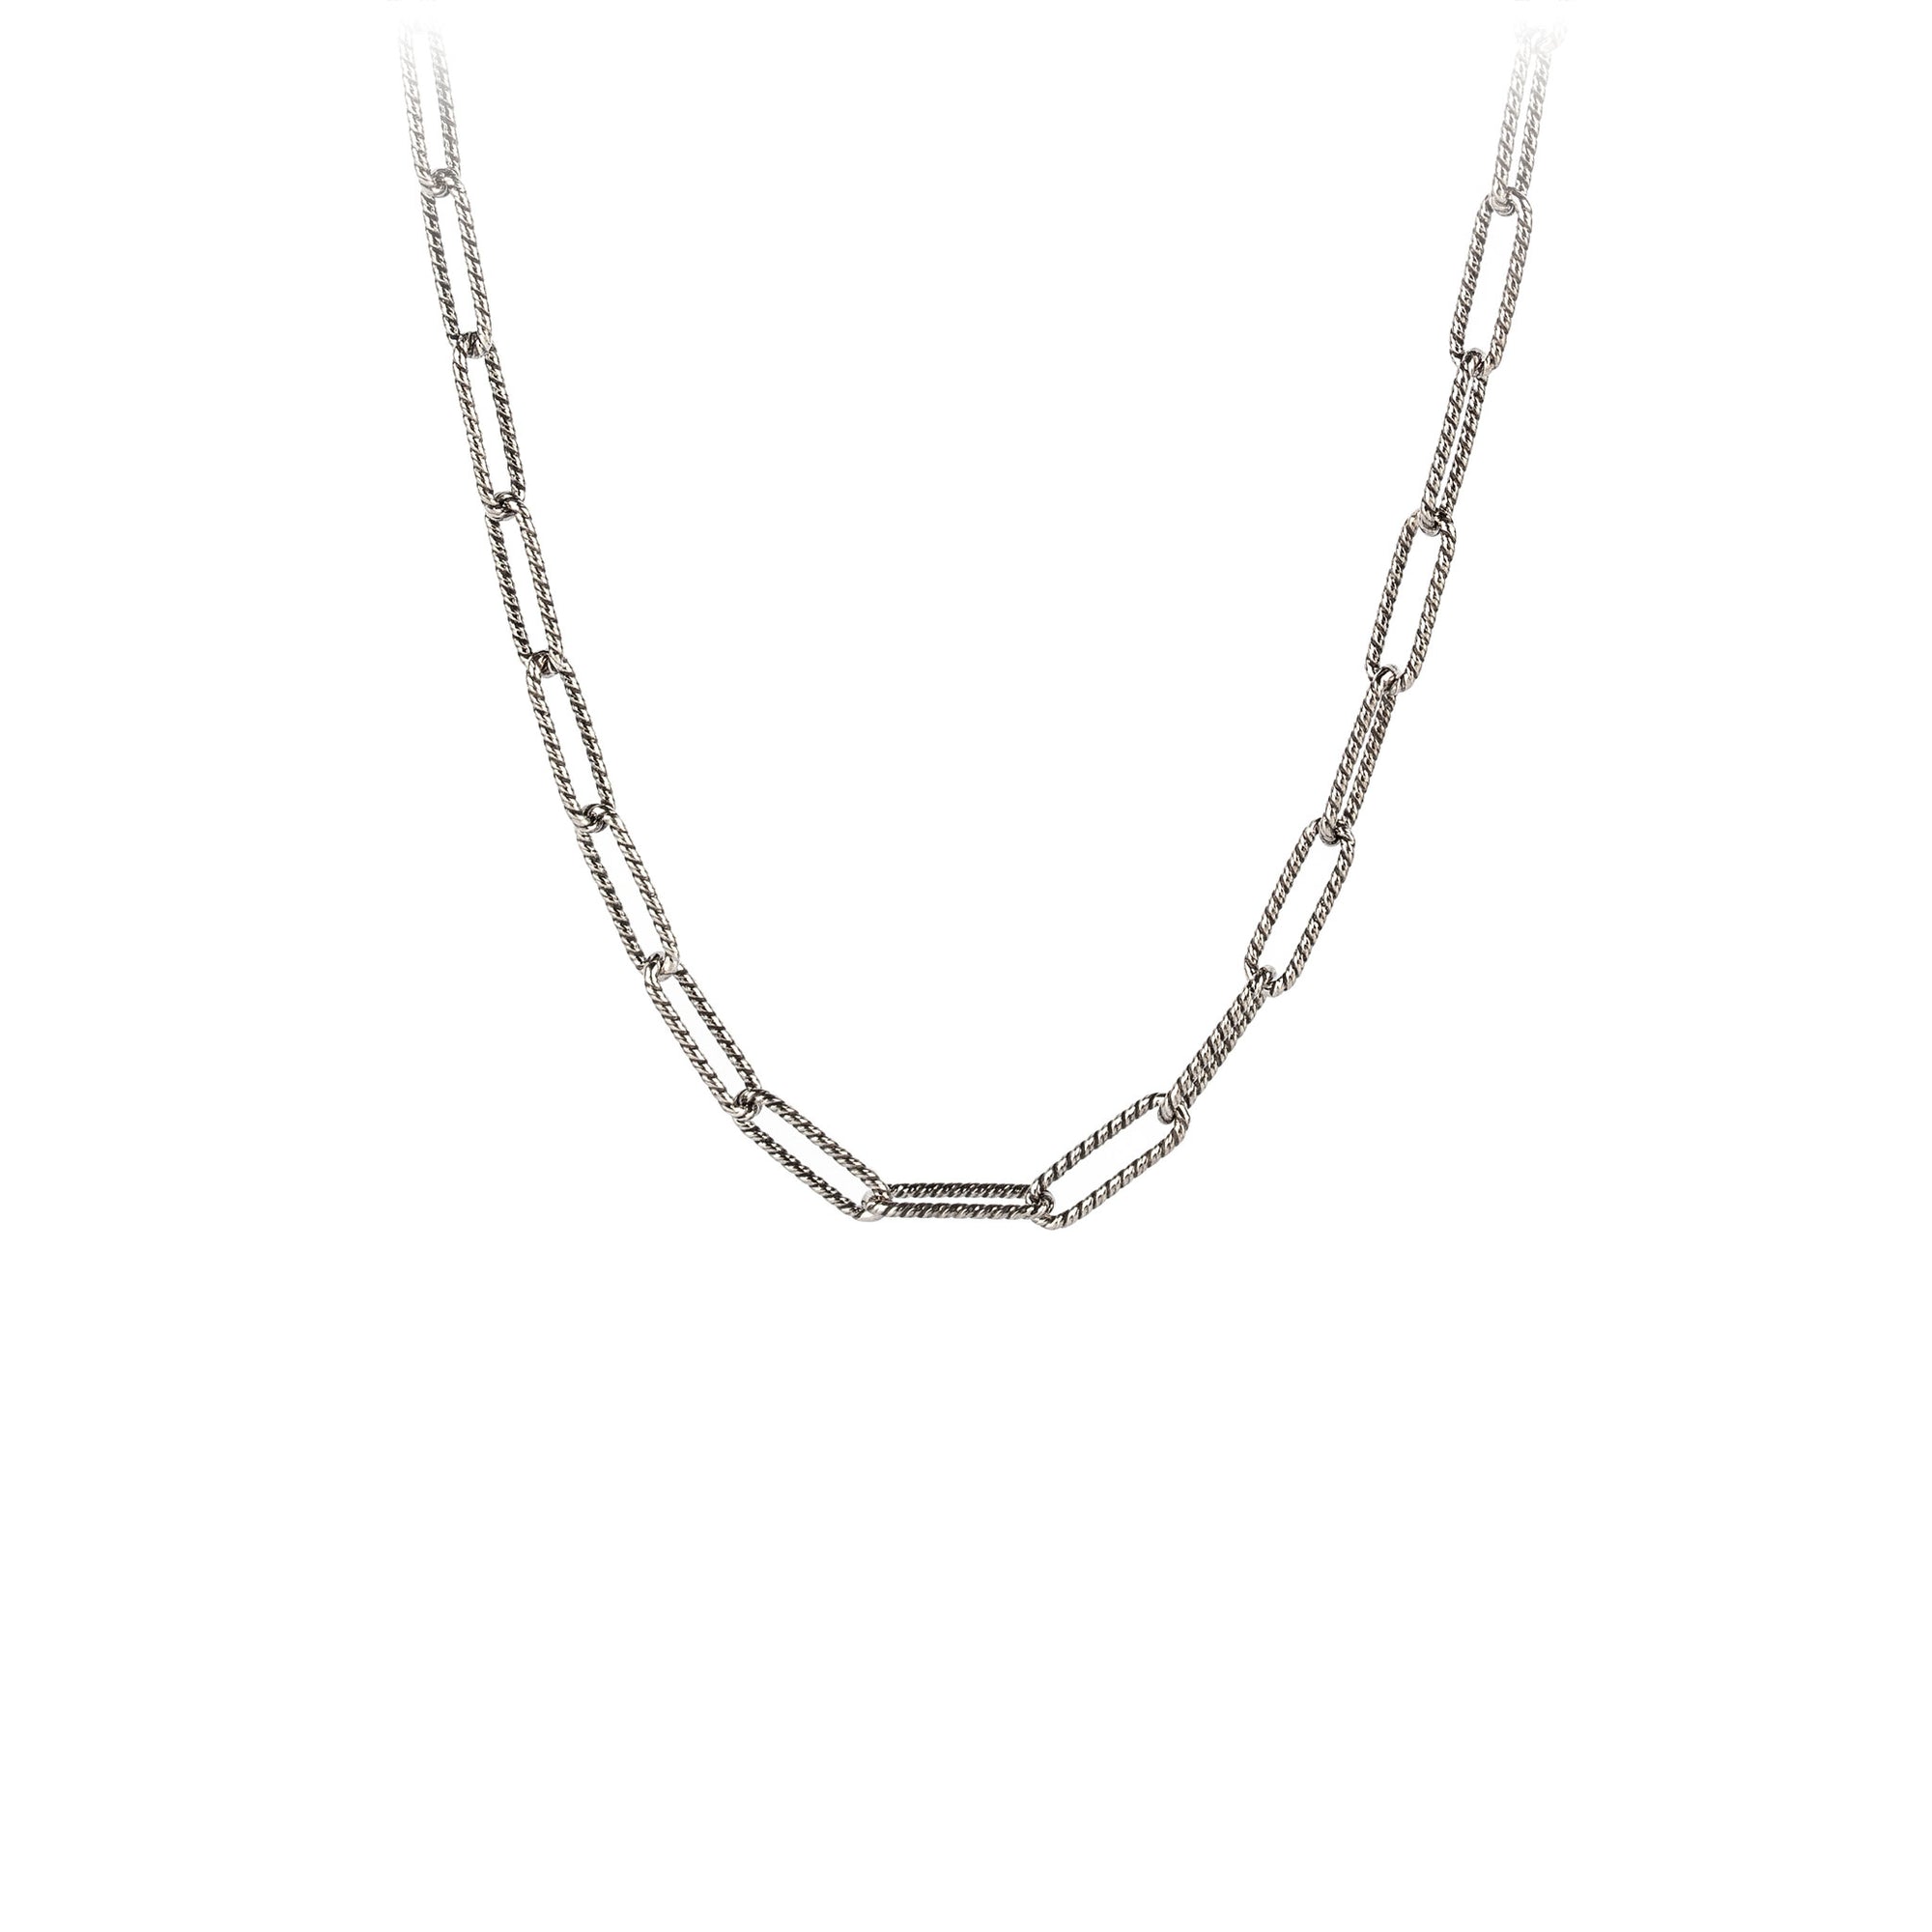 Silver Chain Necklace Cable Chain Paperclip Twist Chain 